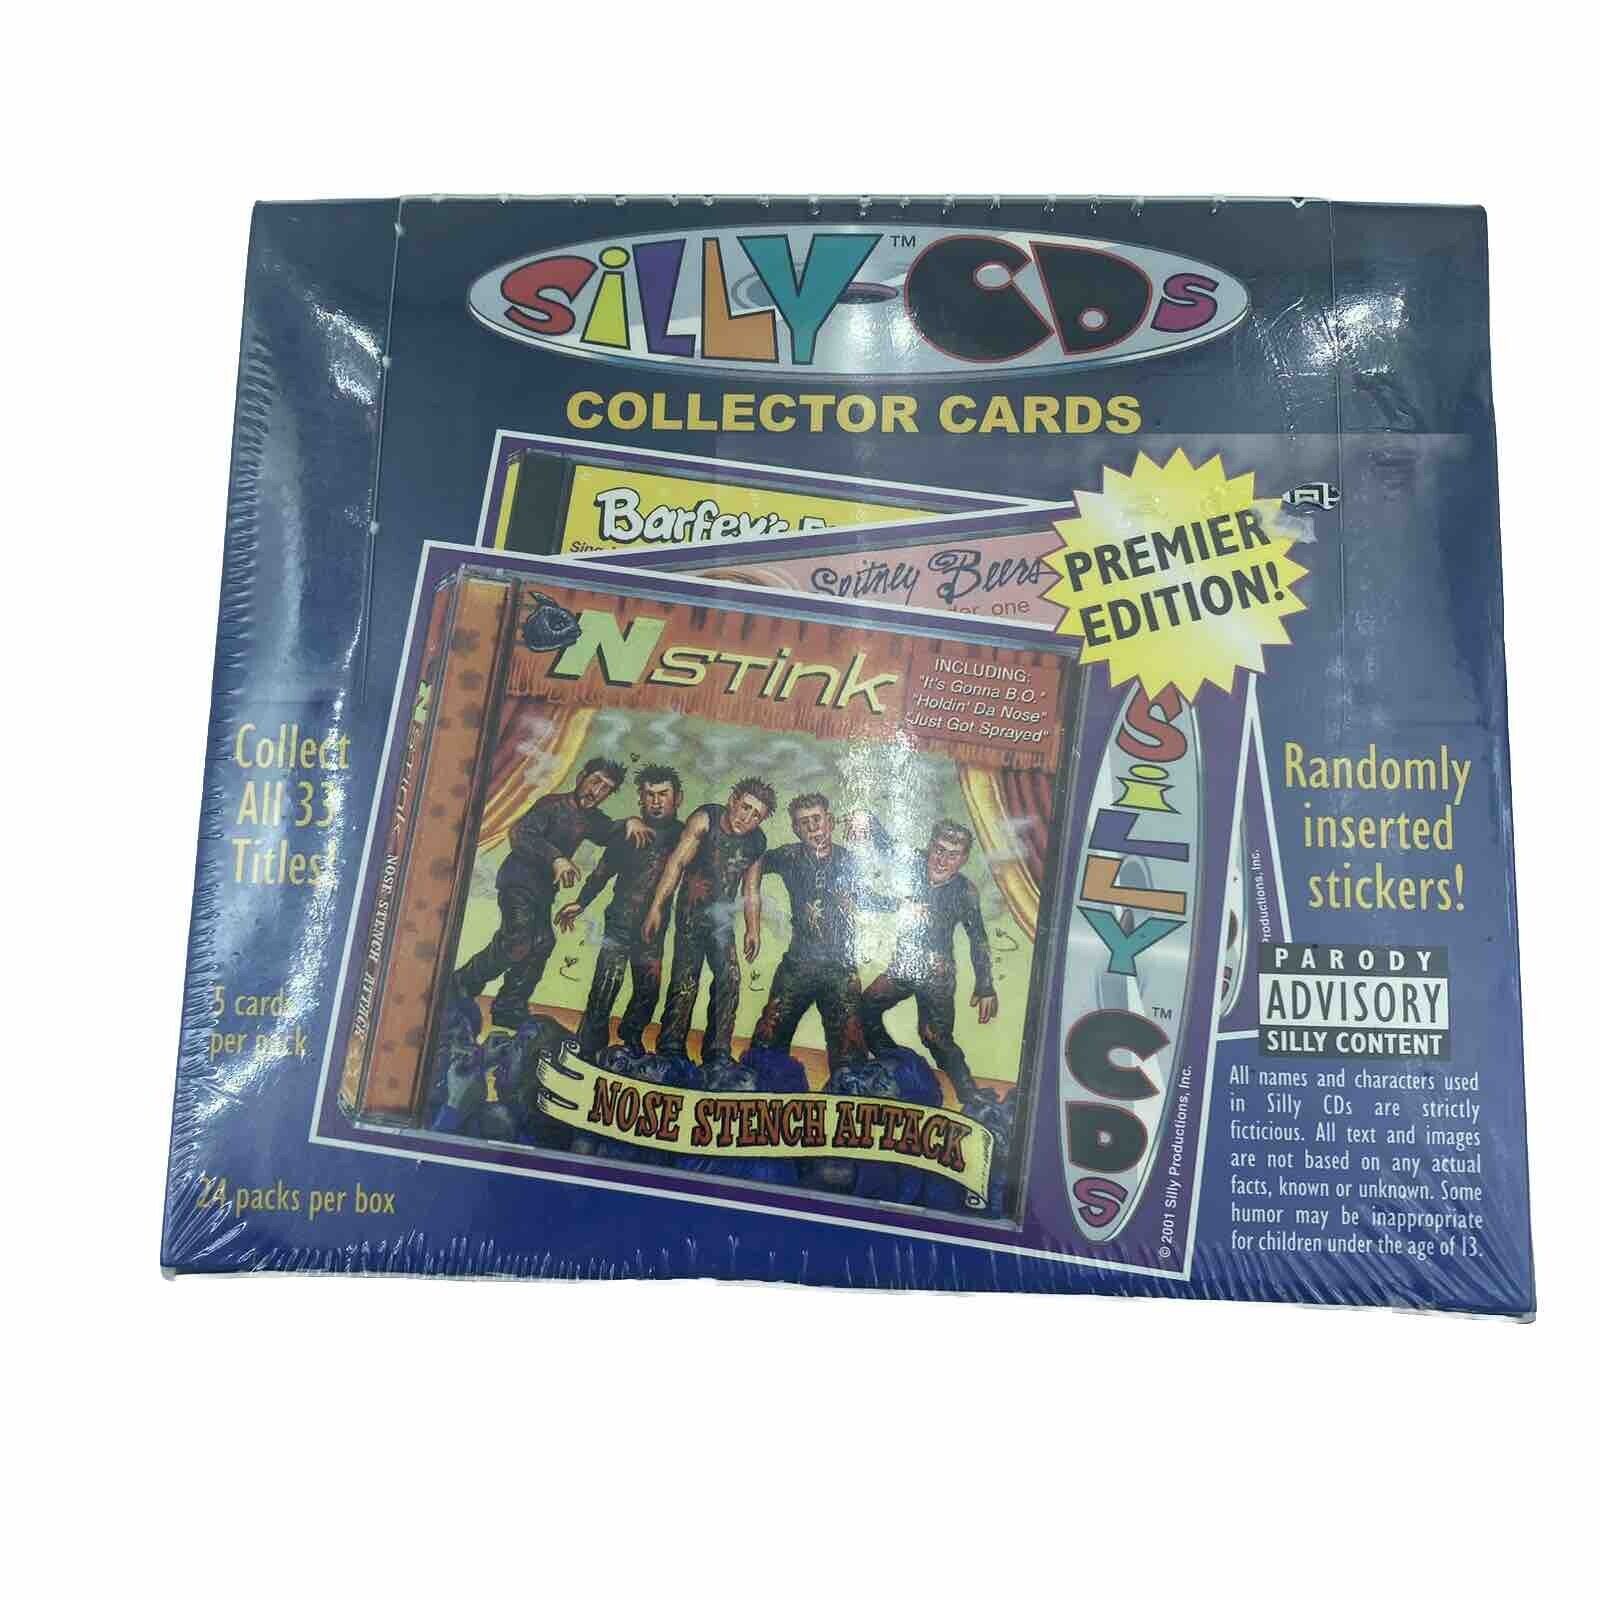 24 PACK BOX 2001 SILLY CD'S TRADING CARDS  FACTORY SEALED BRAND NEW wacky fun